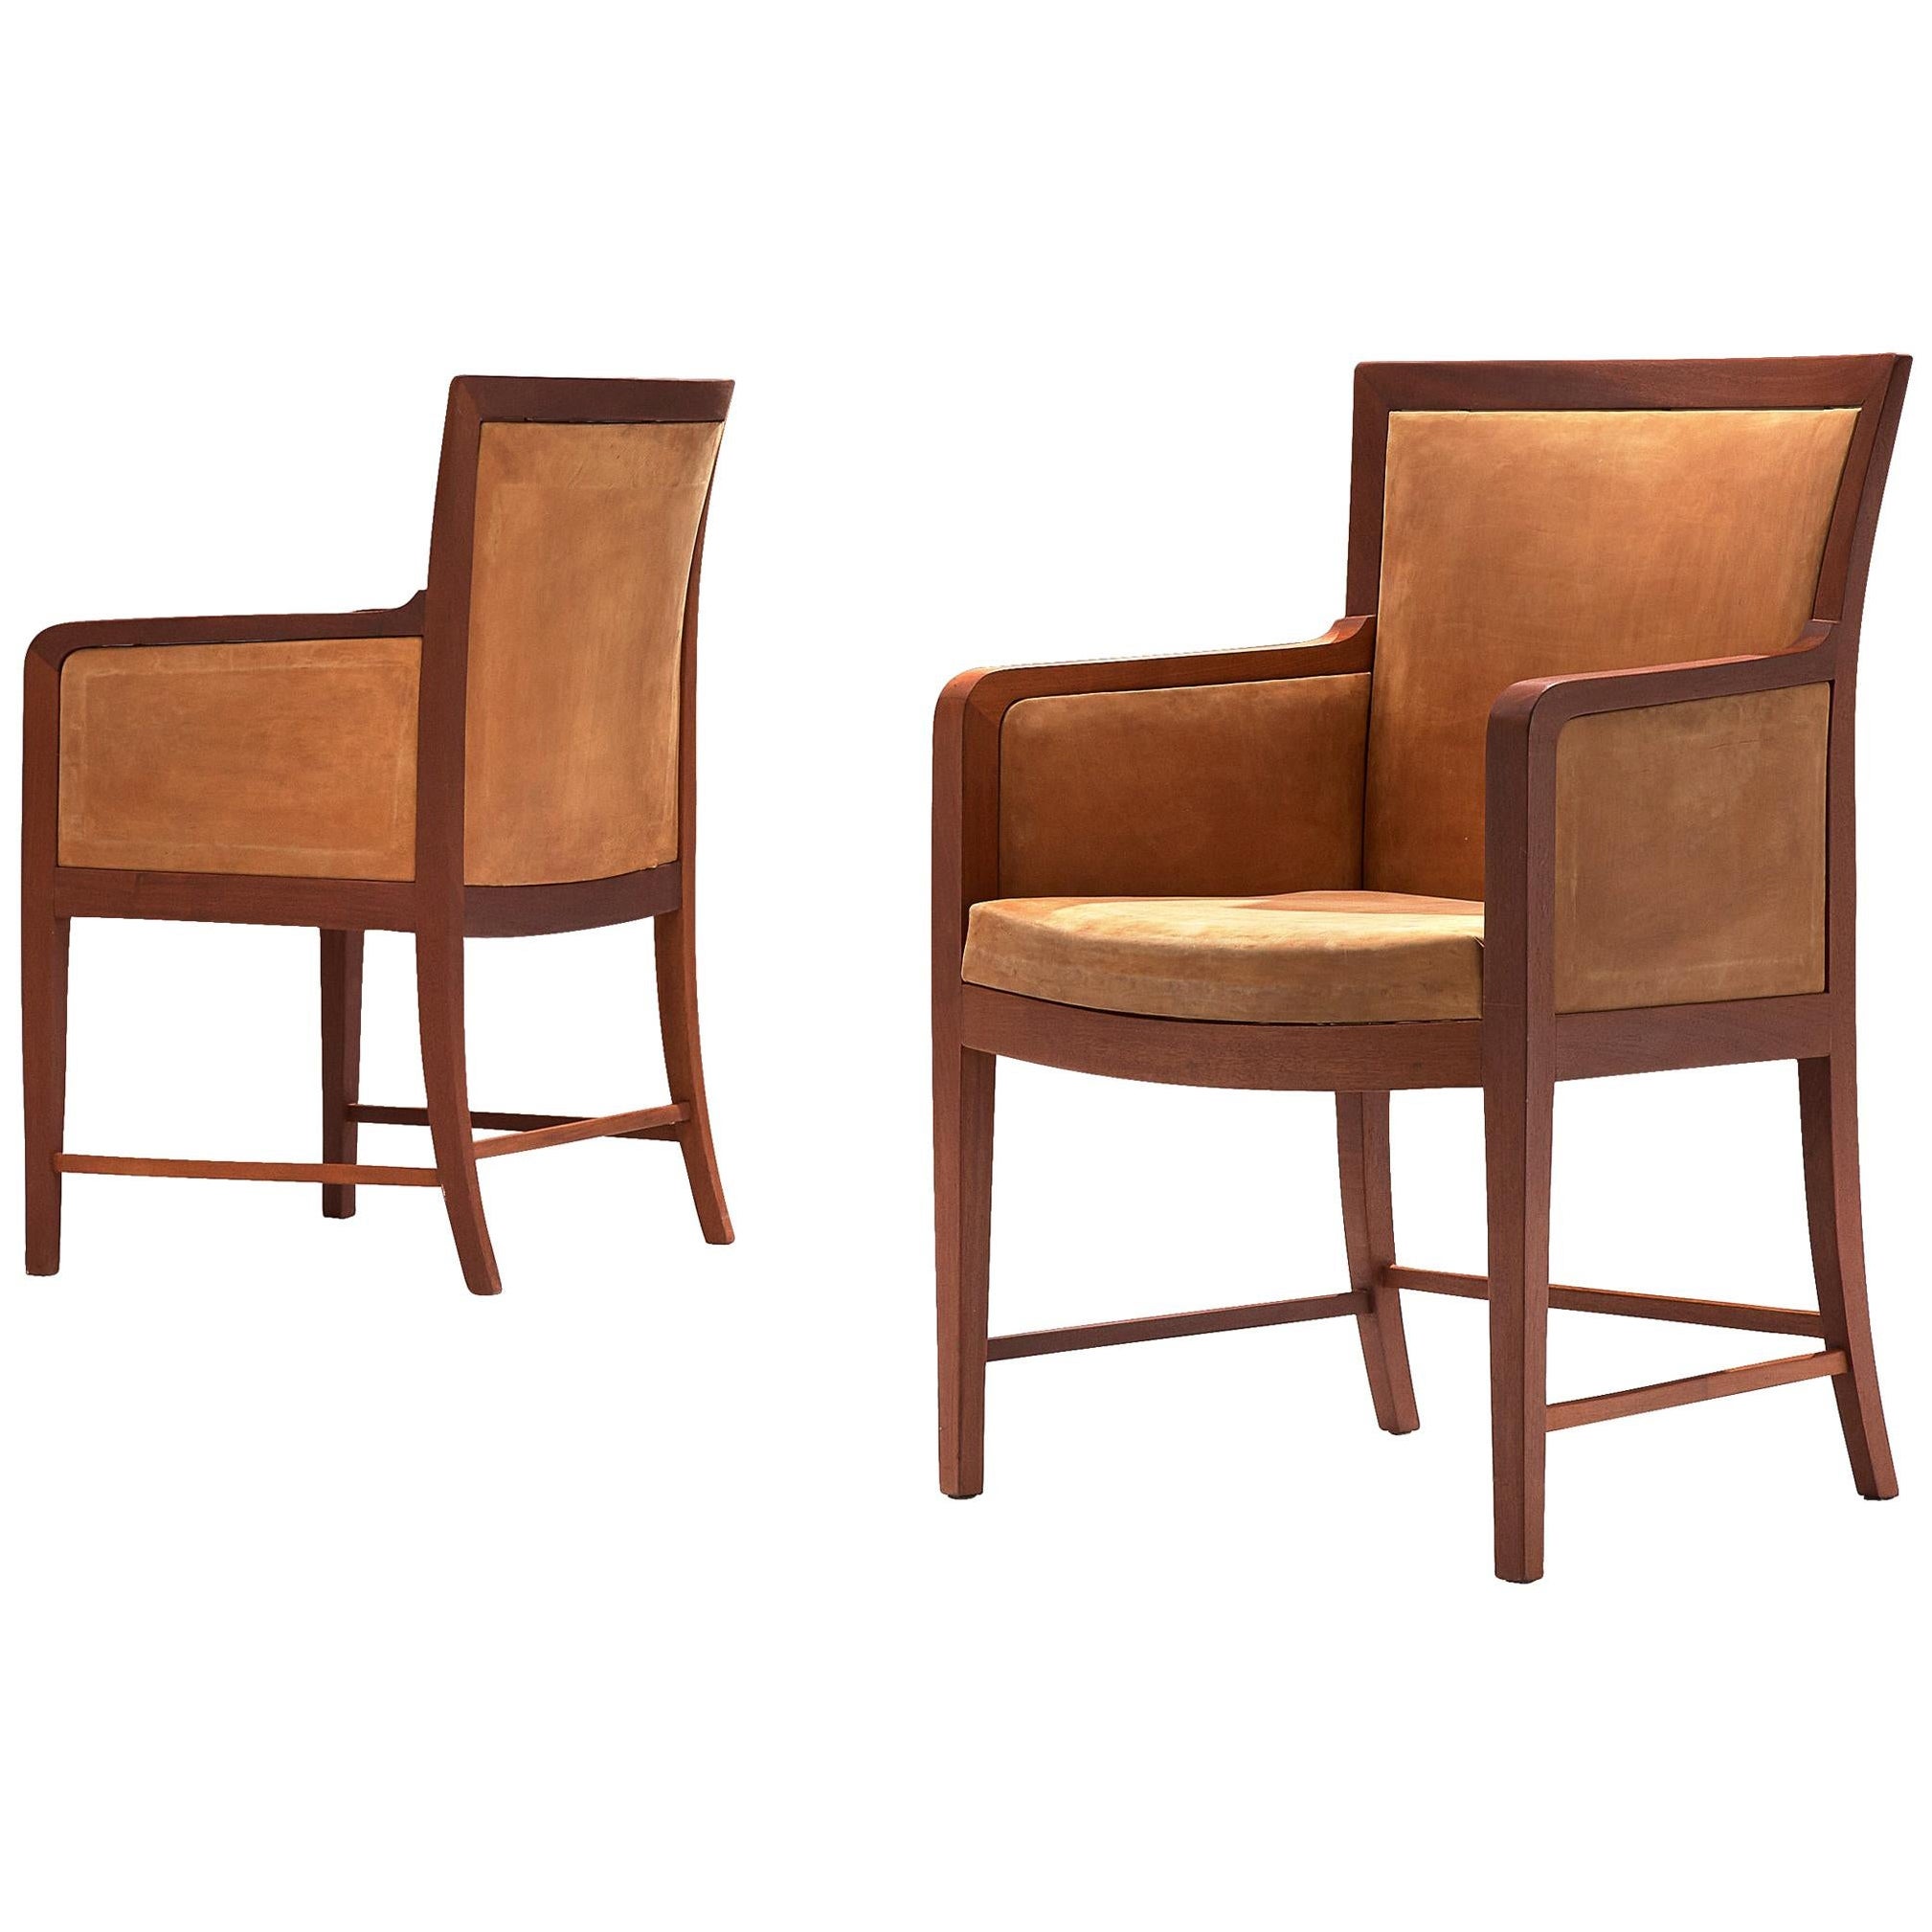 Kaj Gottlob for Rud Rasmussen Pair of Armchairs in Mahogany and Leather For Sale